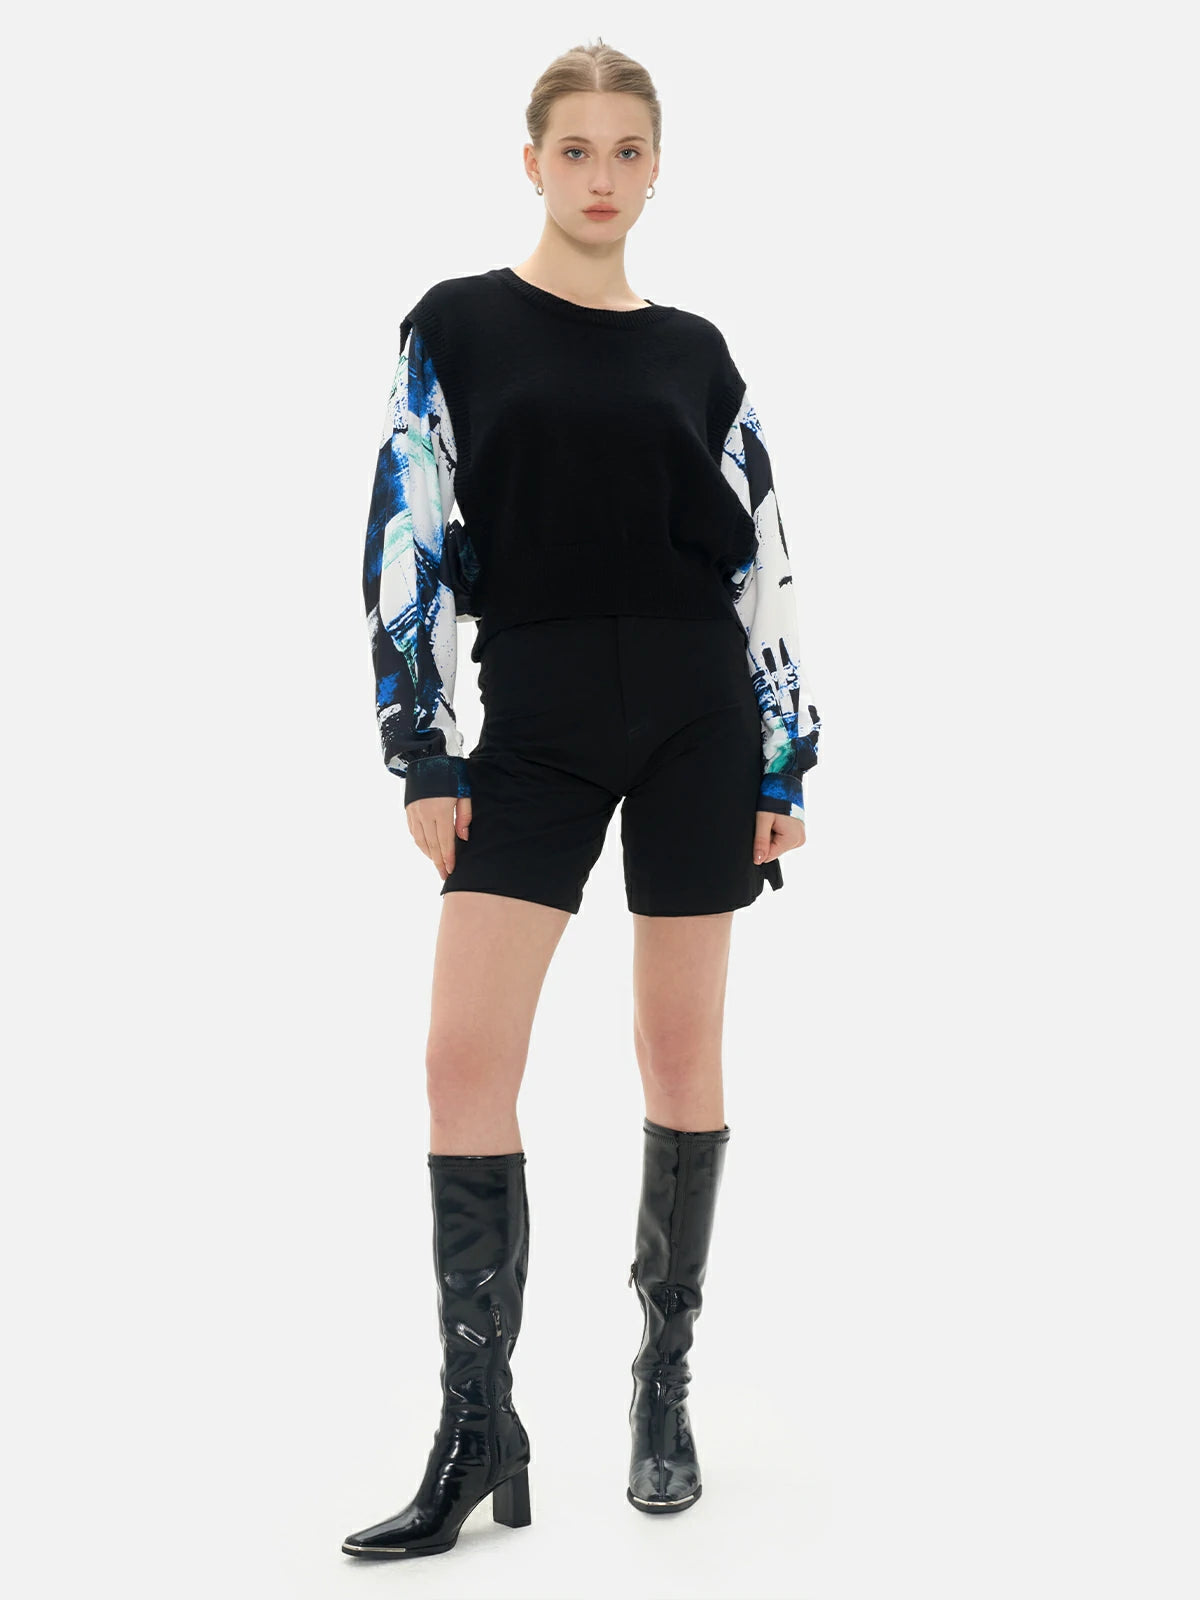 Unique design with contrasting chiffon inserts sweater